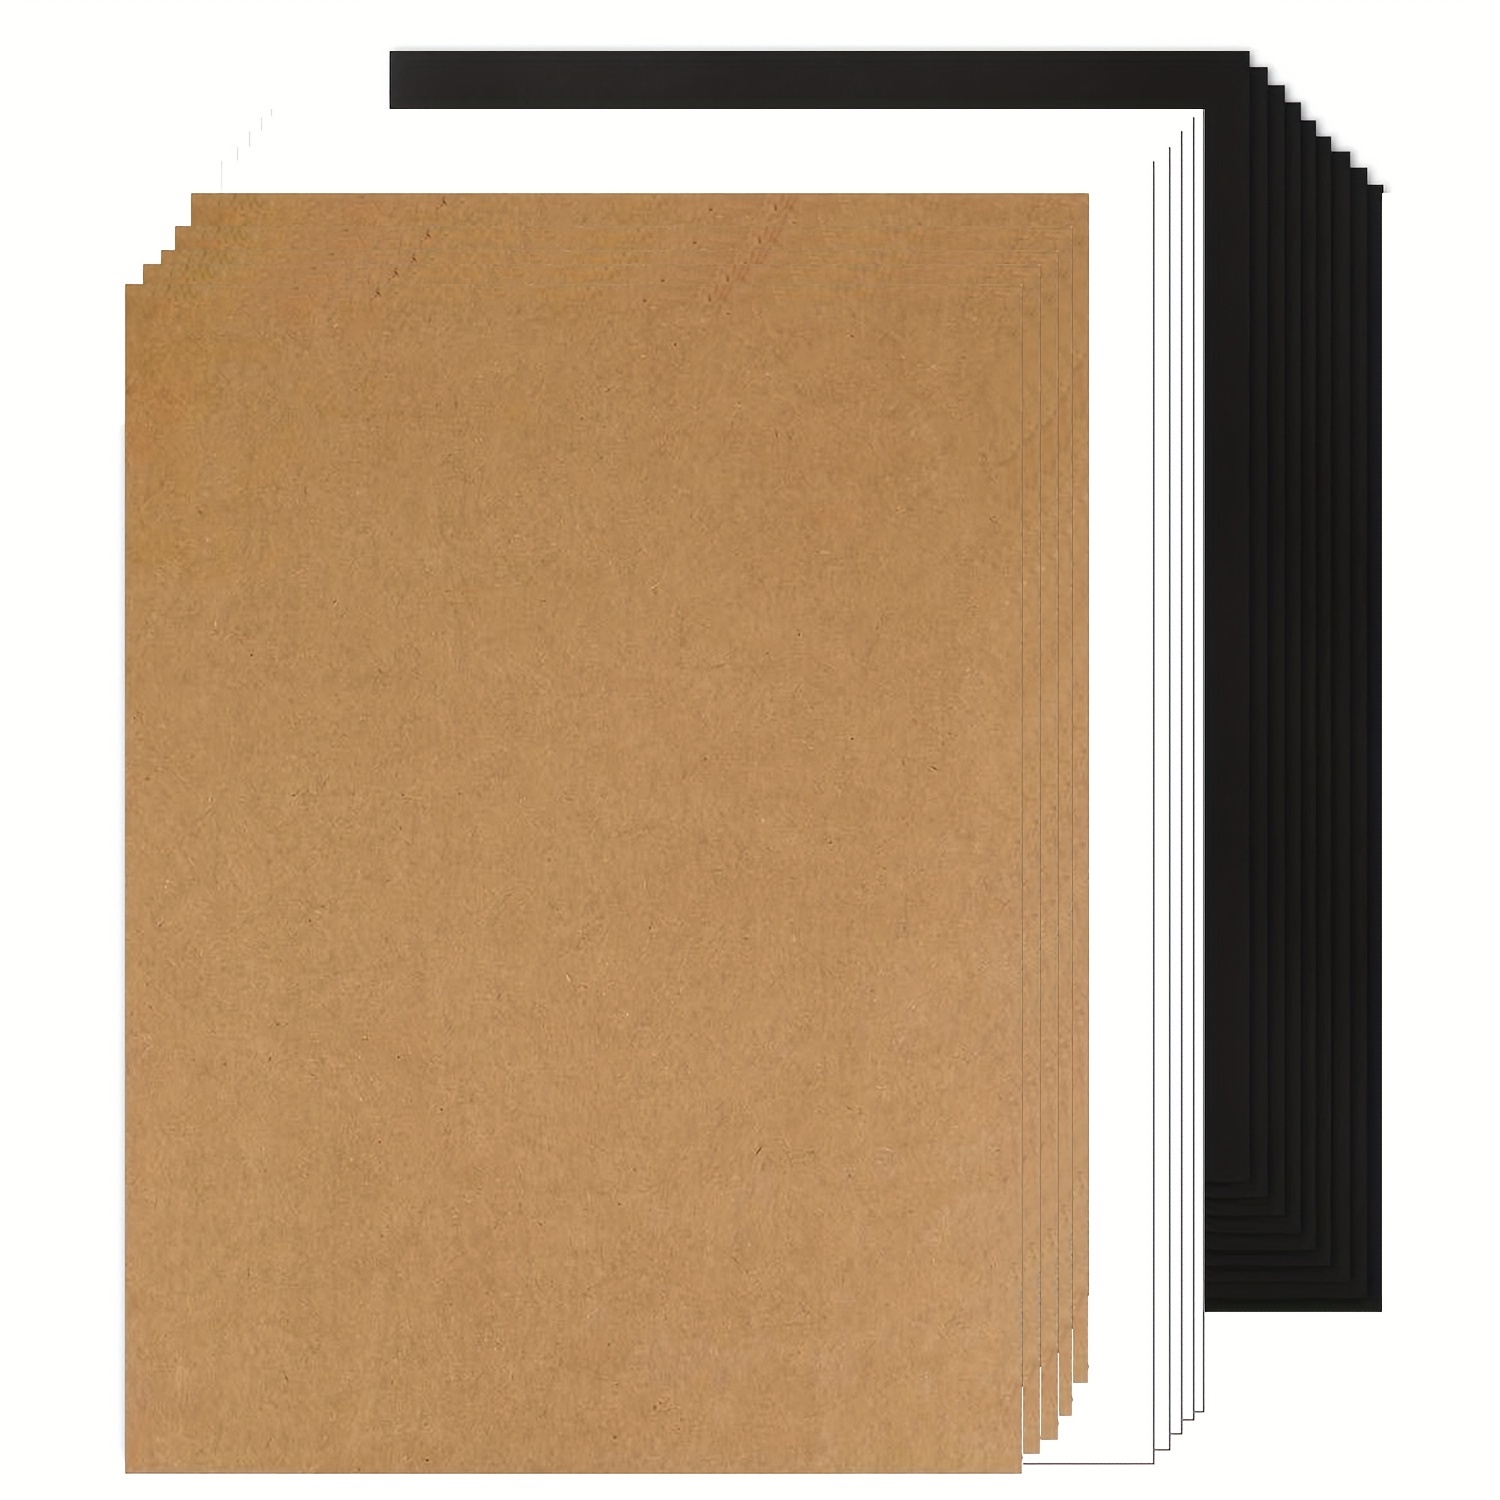 Black Cardstock Thick Paper 50 Sheets 8.5 x 11 Heavyweight 92lb